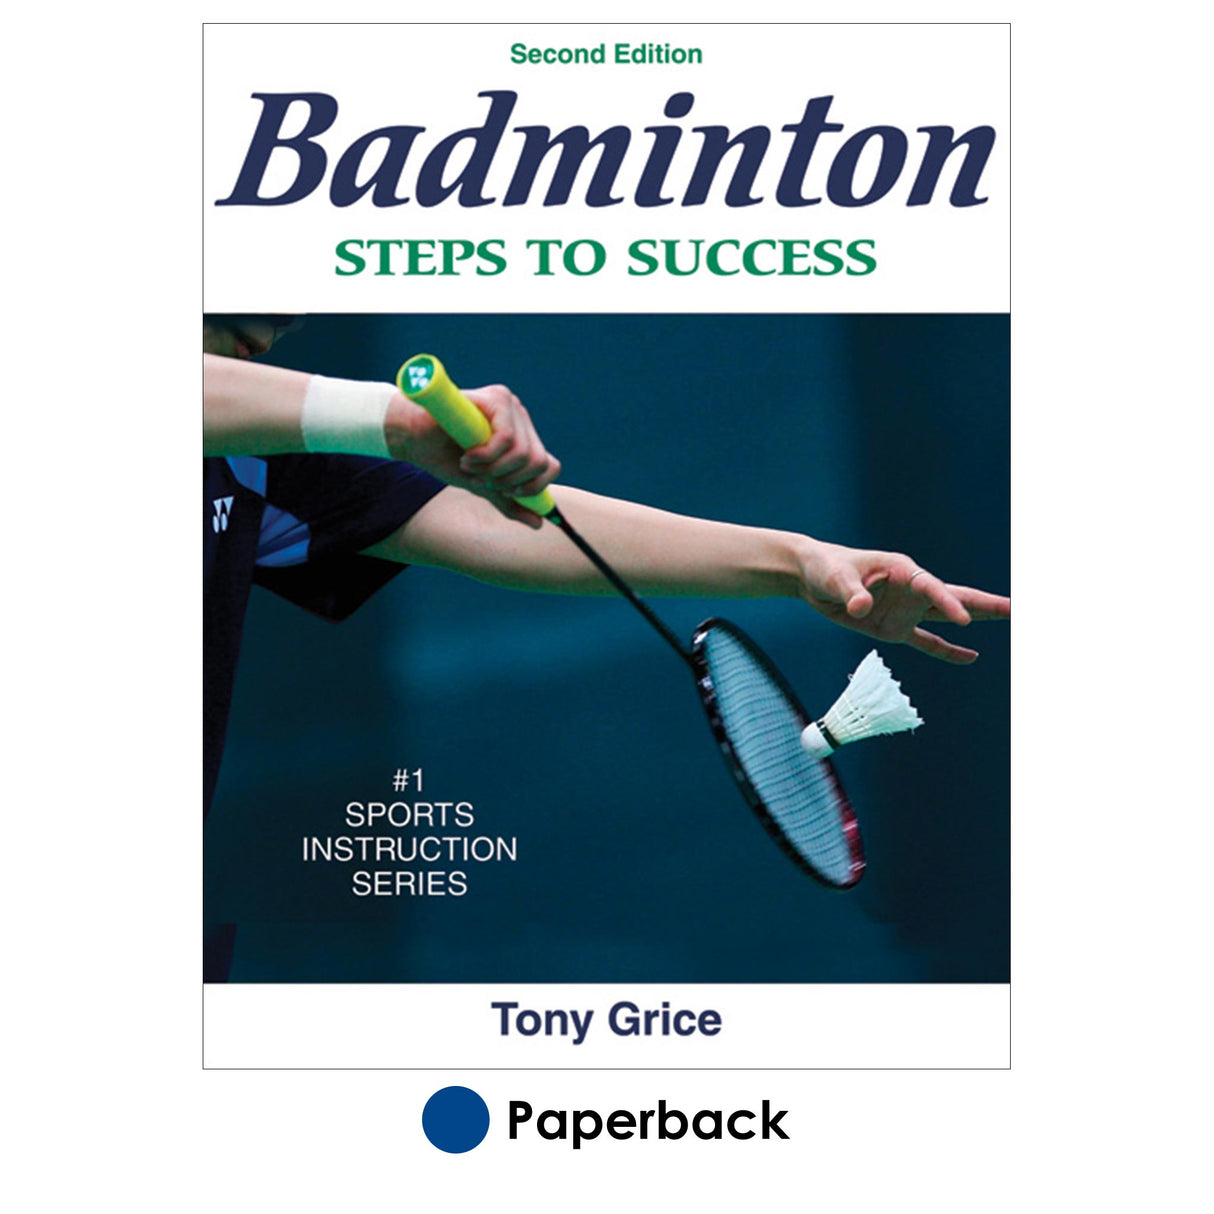 Badminton: Steps to Success - 2nd Edition